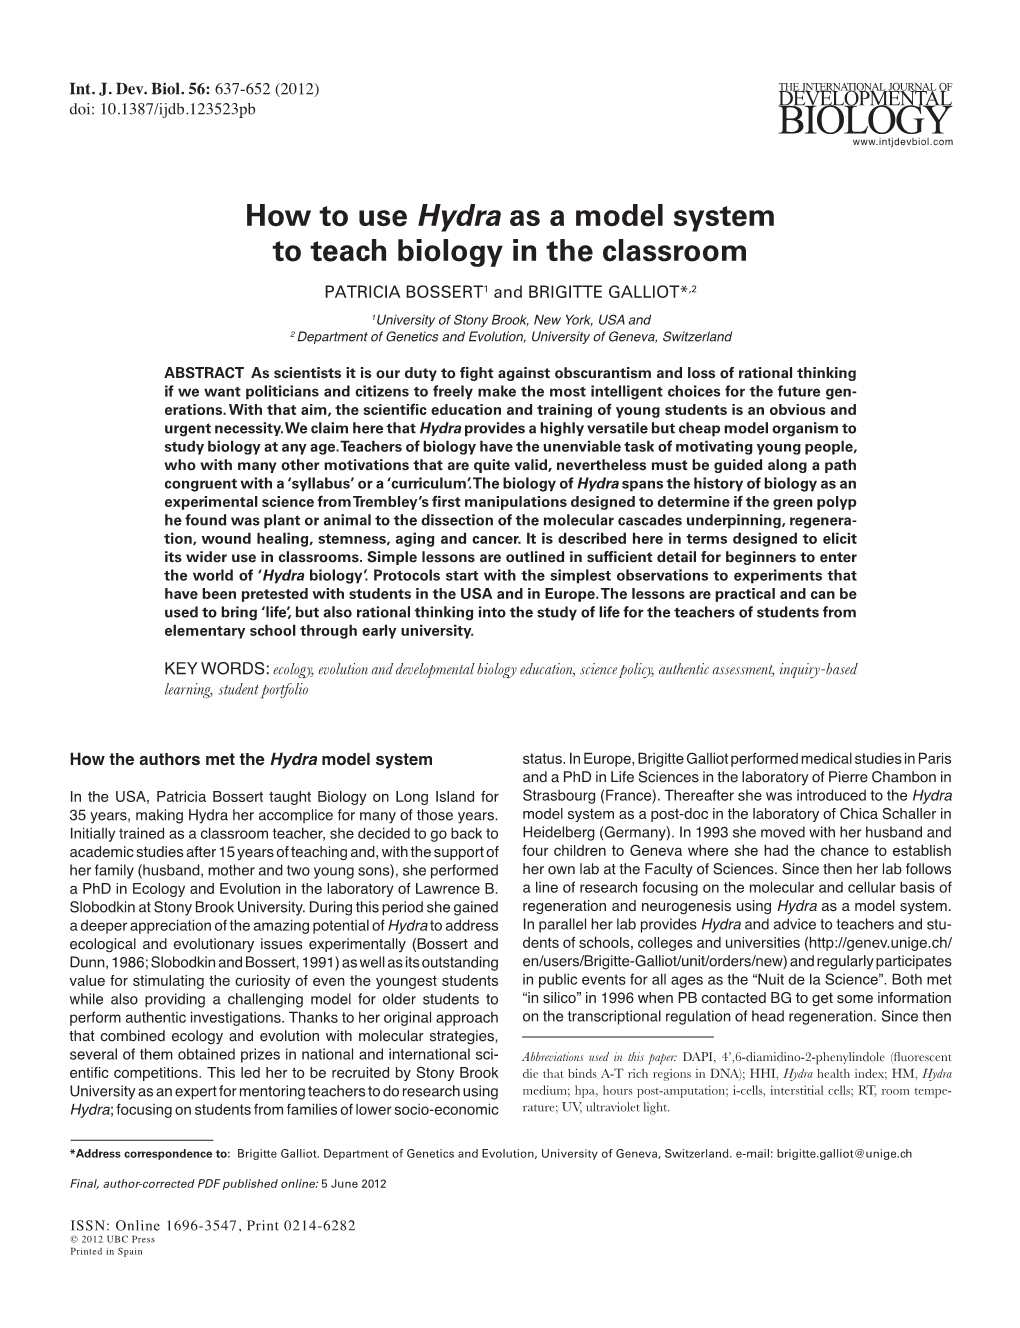 How to Use Hydra As a Model System to Teach Biology in the Classroom PATRICIA BOSSERT1 and BRIGITTE GALLIOT*,2